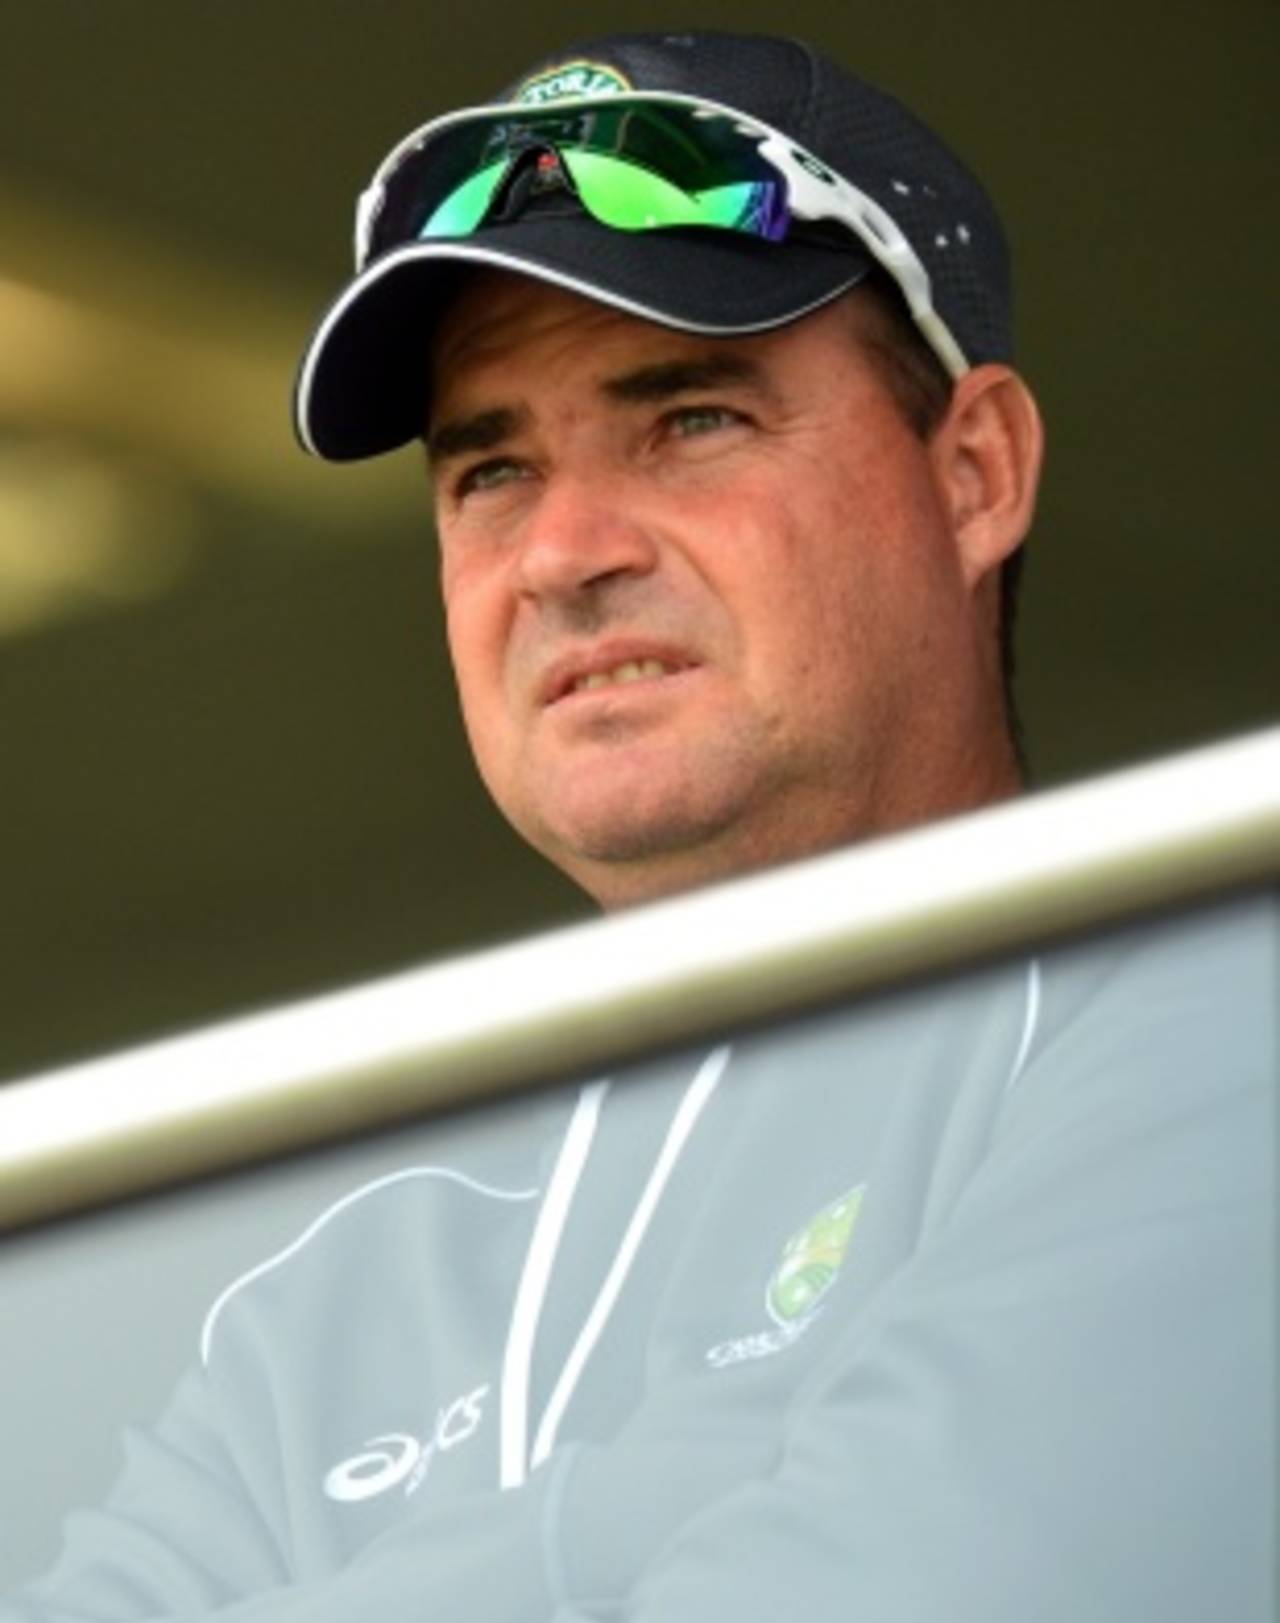 Arthur's track record of success with South Africa does not "prove" he is a brilliant coach any more than his track record of relative failure with Australia proves he is a bad one&nbsp;&nbsp;&bull;&nbsp;&nbsp;AFP